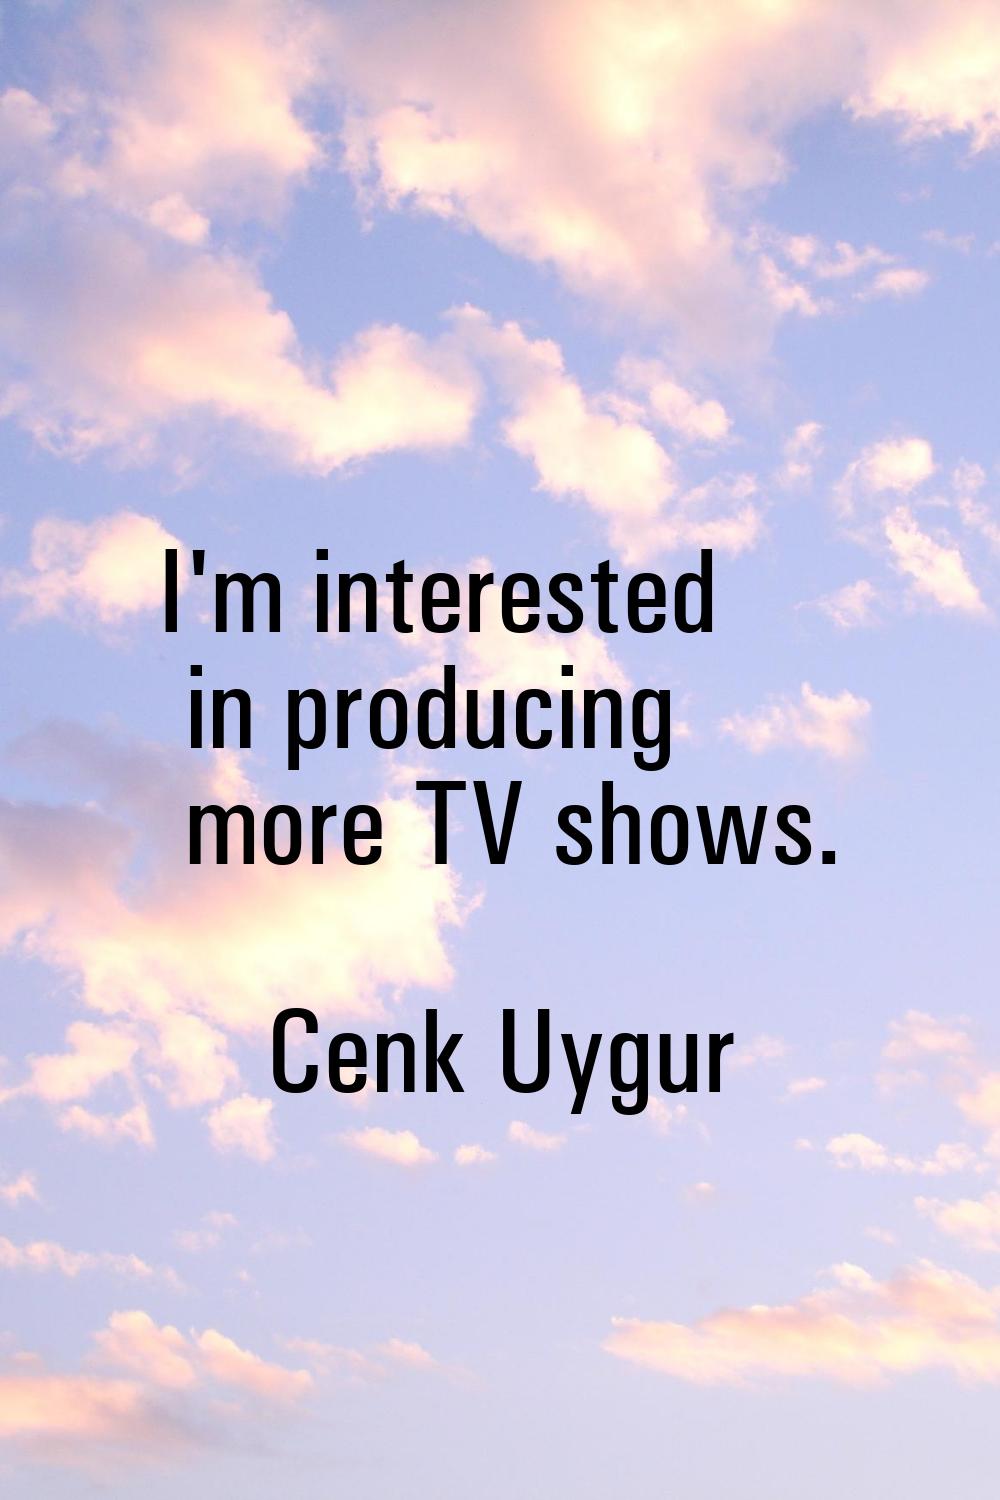 I'm interested in producing more TV shows.